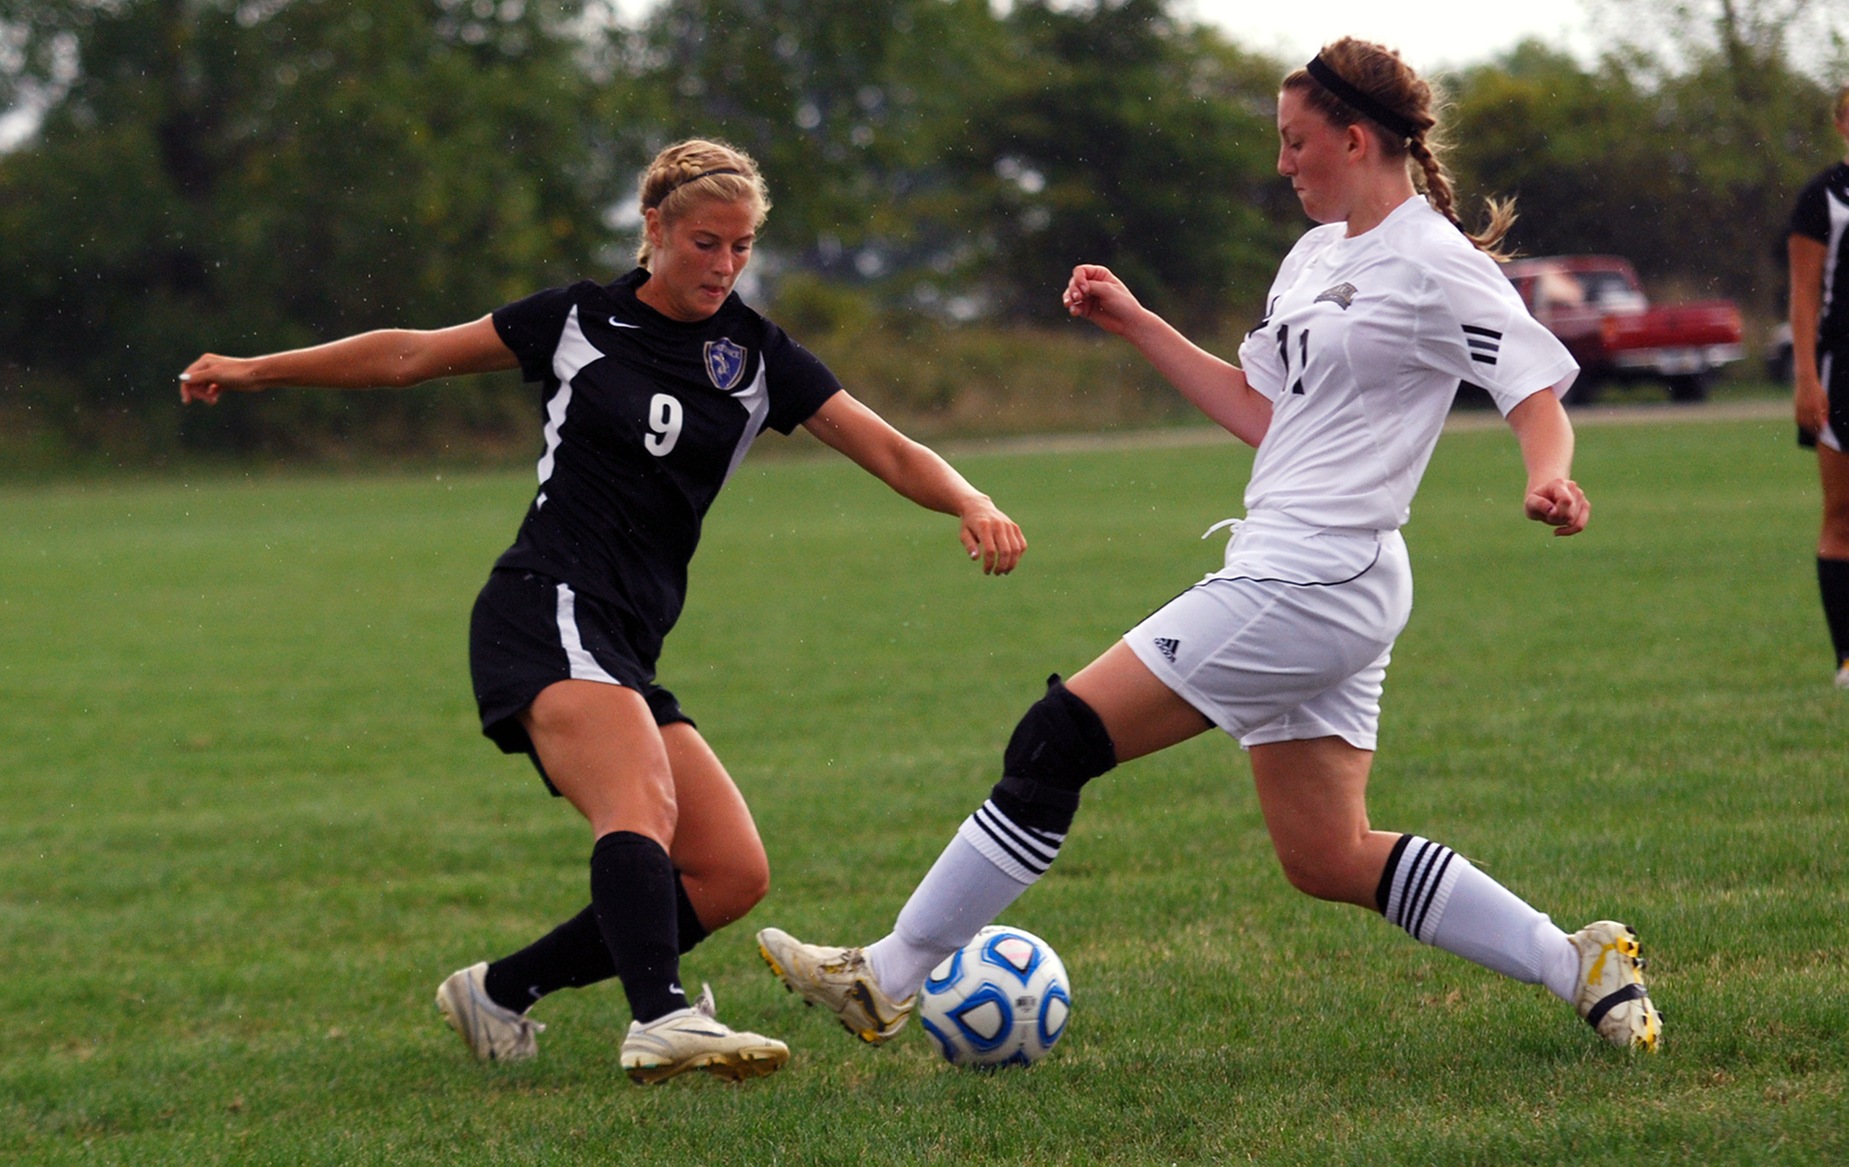 Heitkamp Goal Not Enough in Loss to Earlham